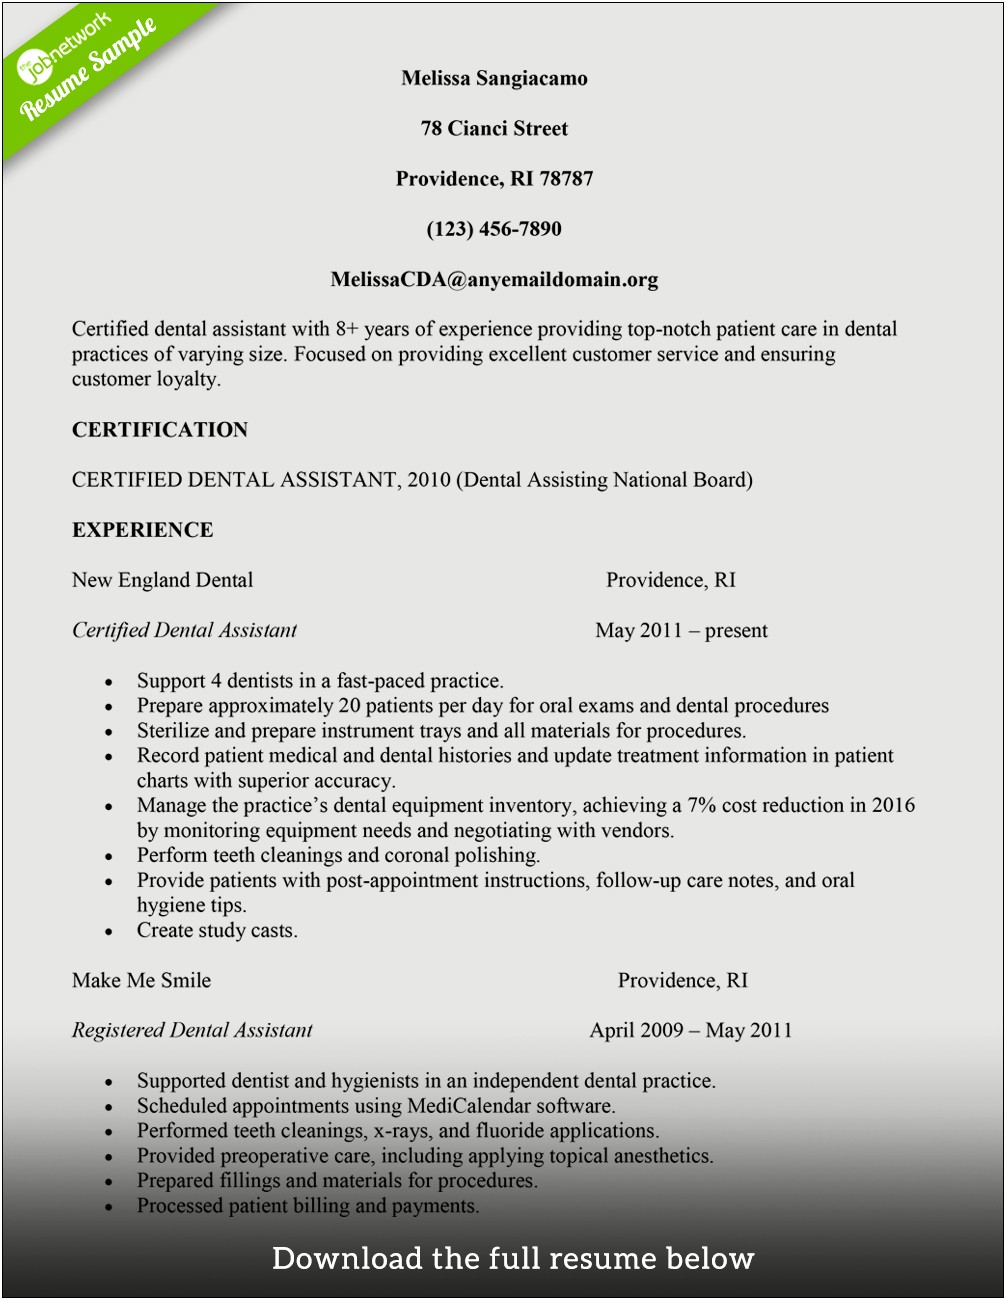 Does Cpr Certification Look Good On A Resume